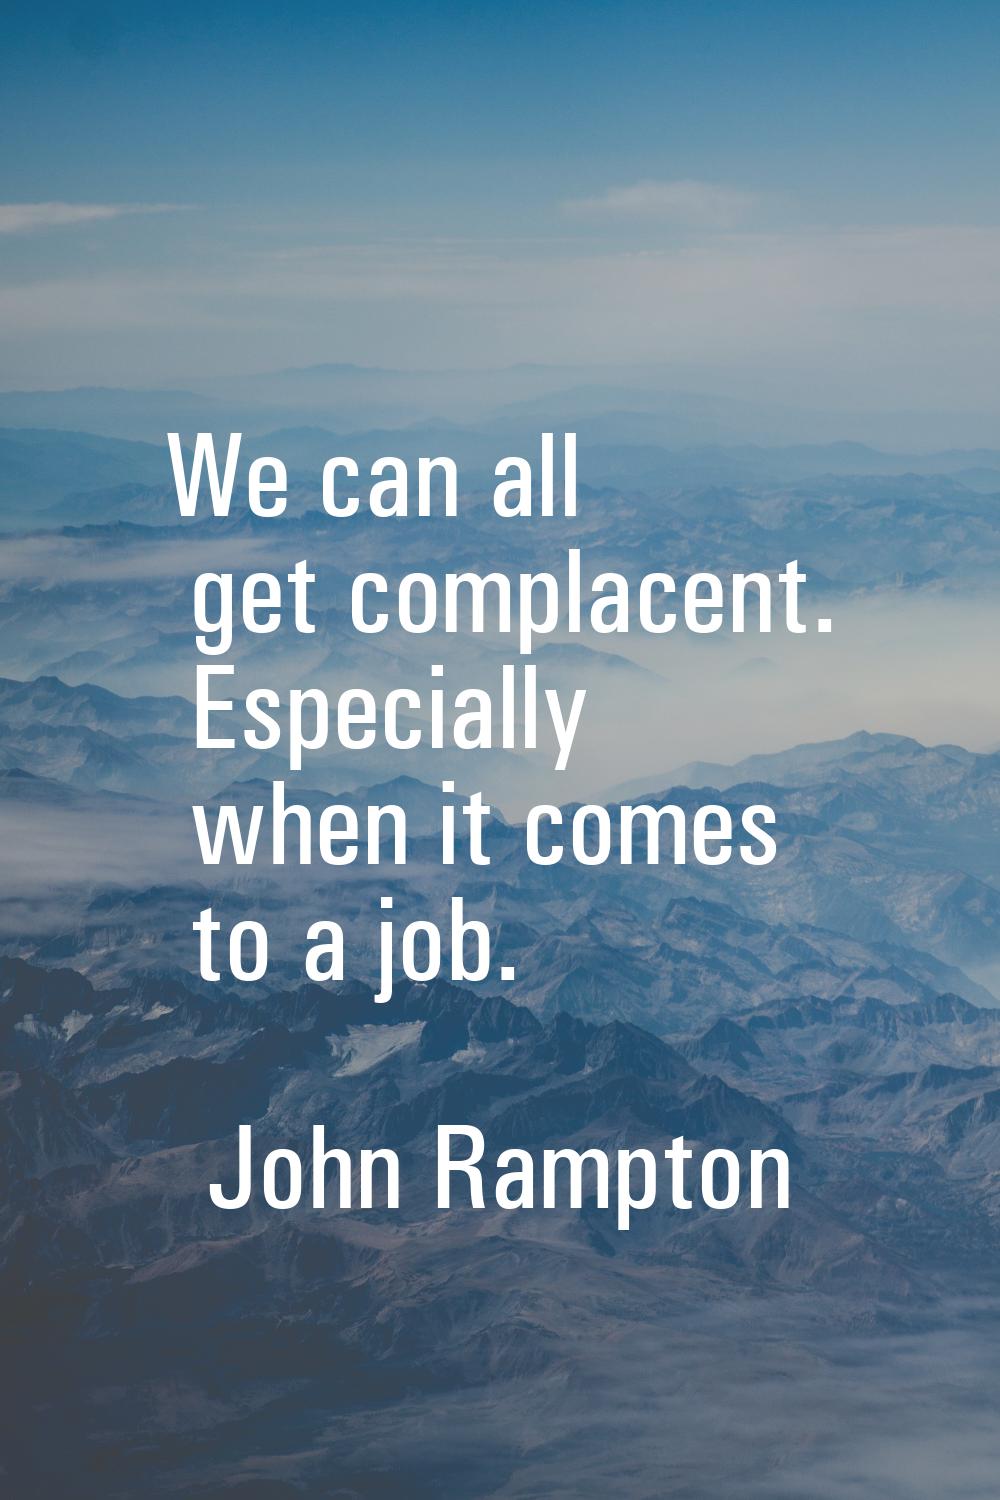 We can all get complacent. Especially when it comes to a job.